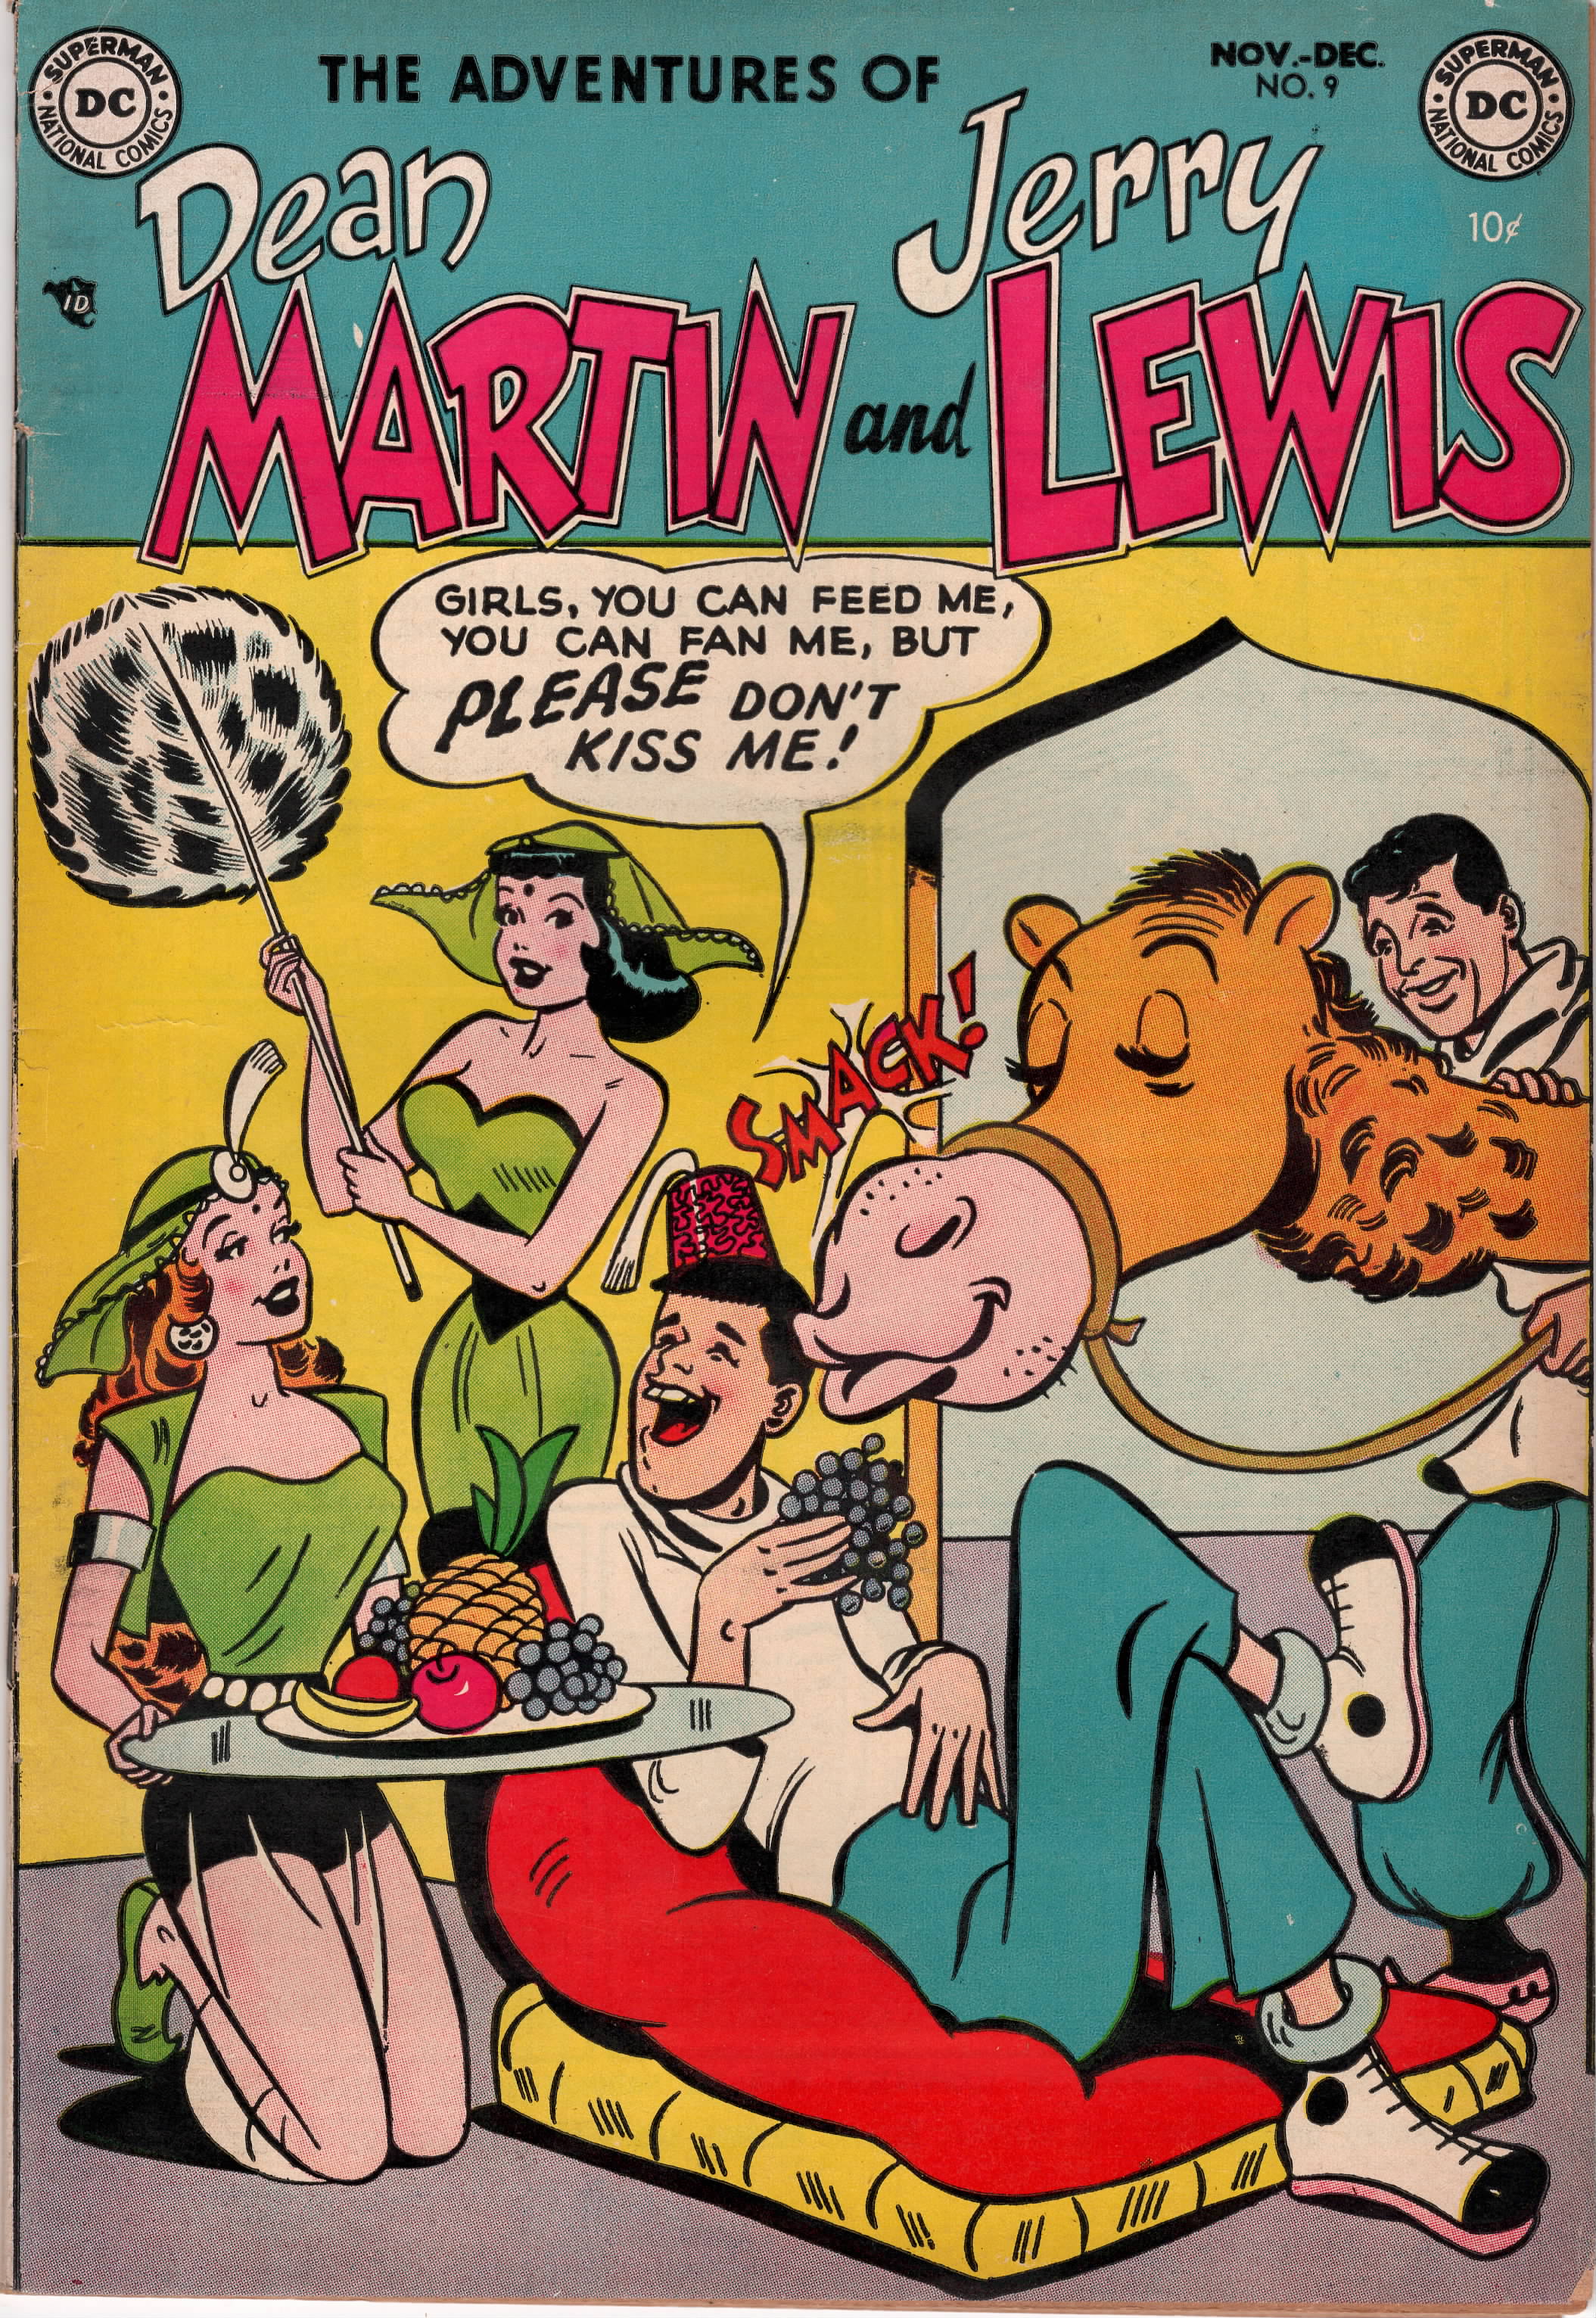 Adventures of Dean Martin And Jerry Lewis #09